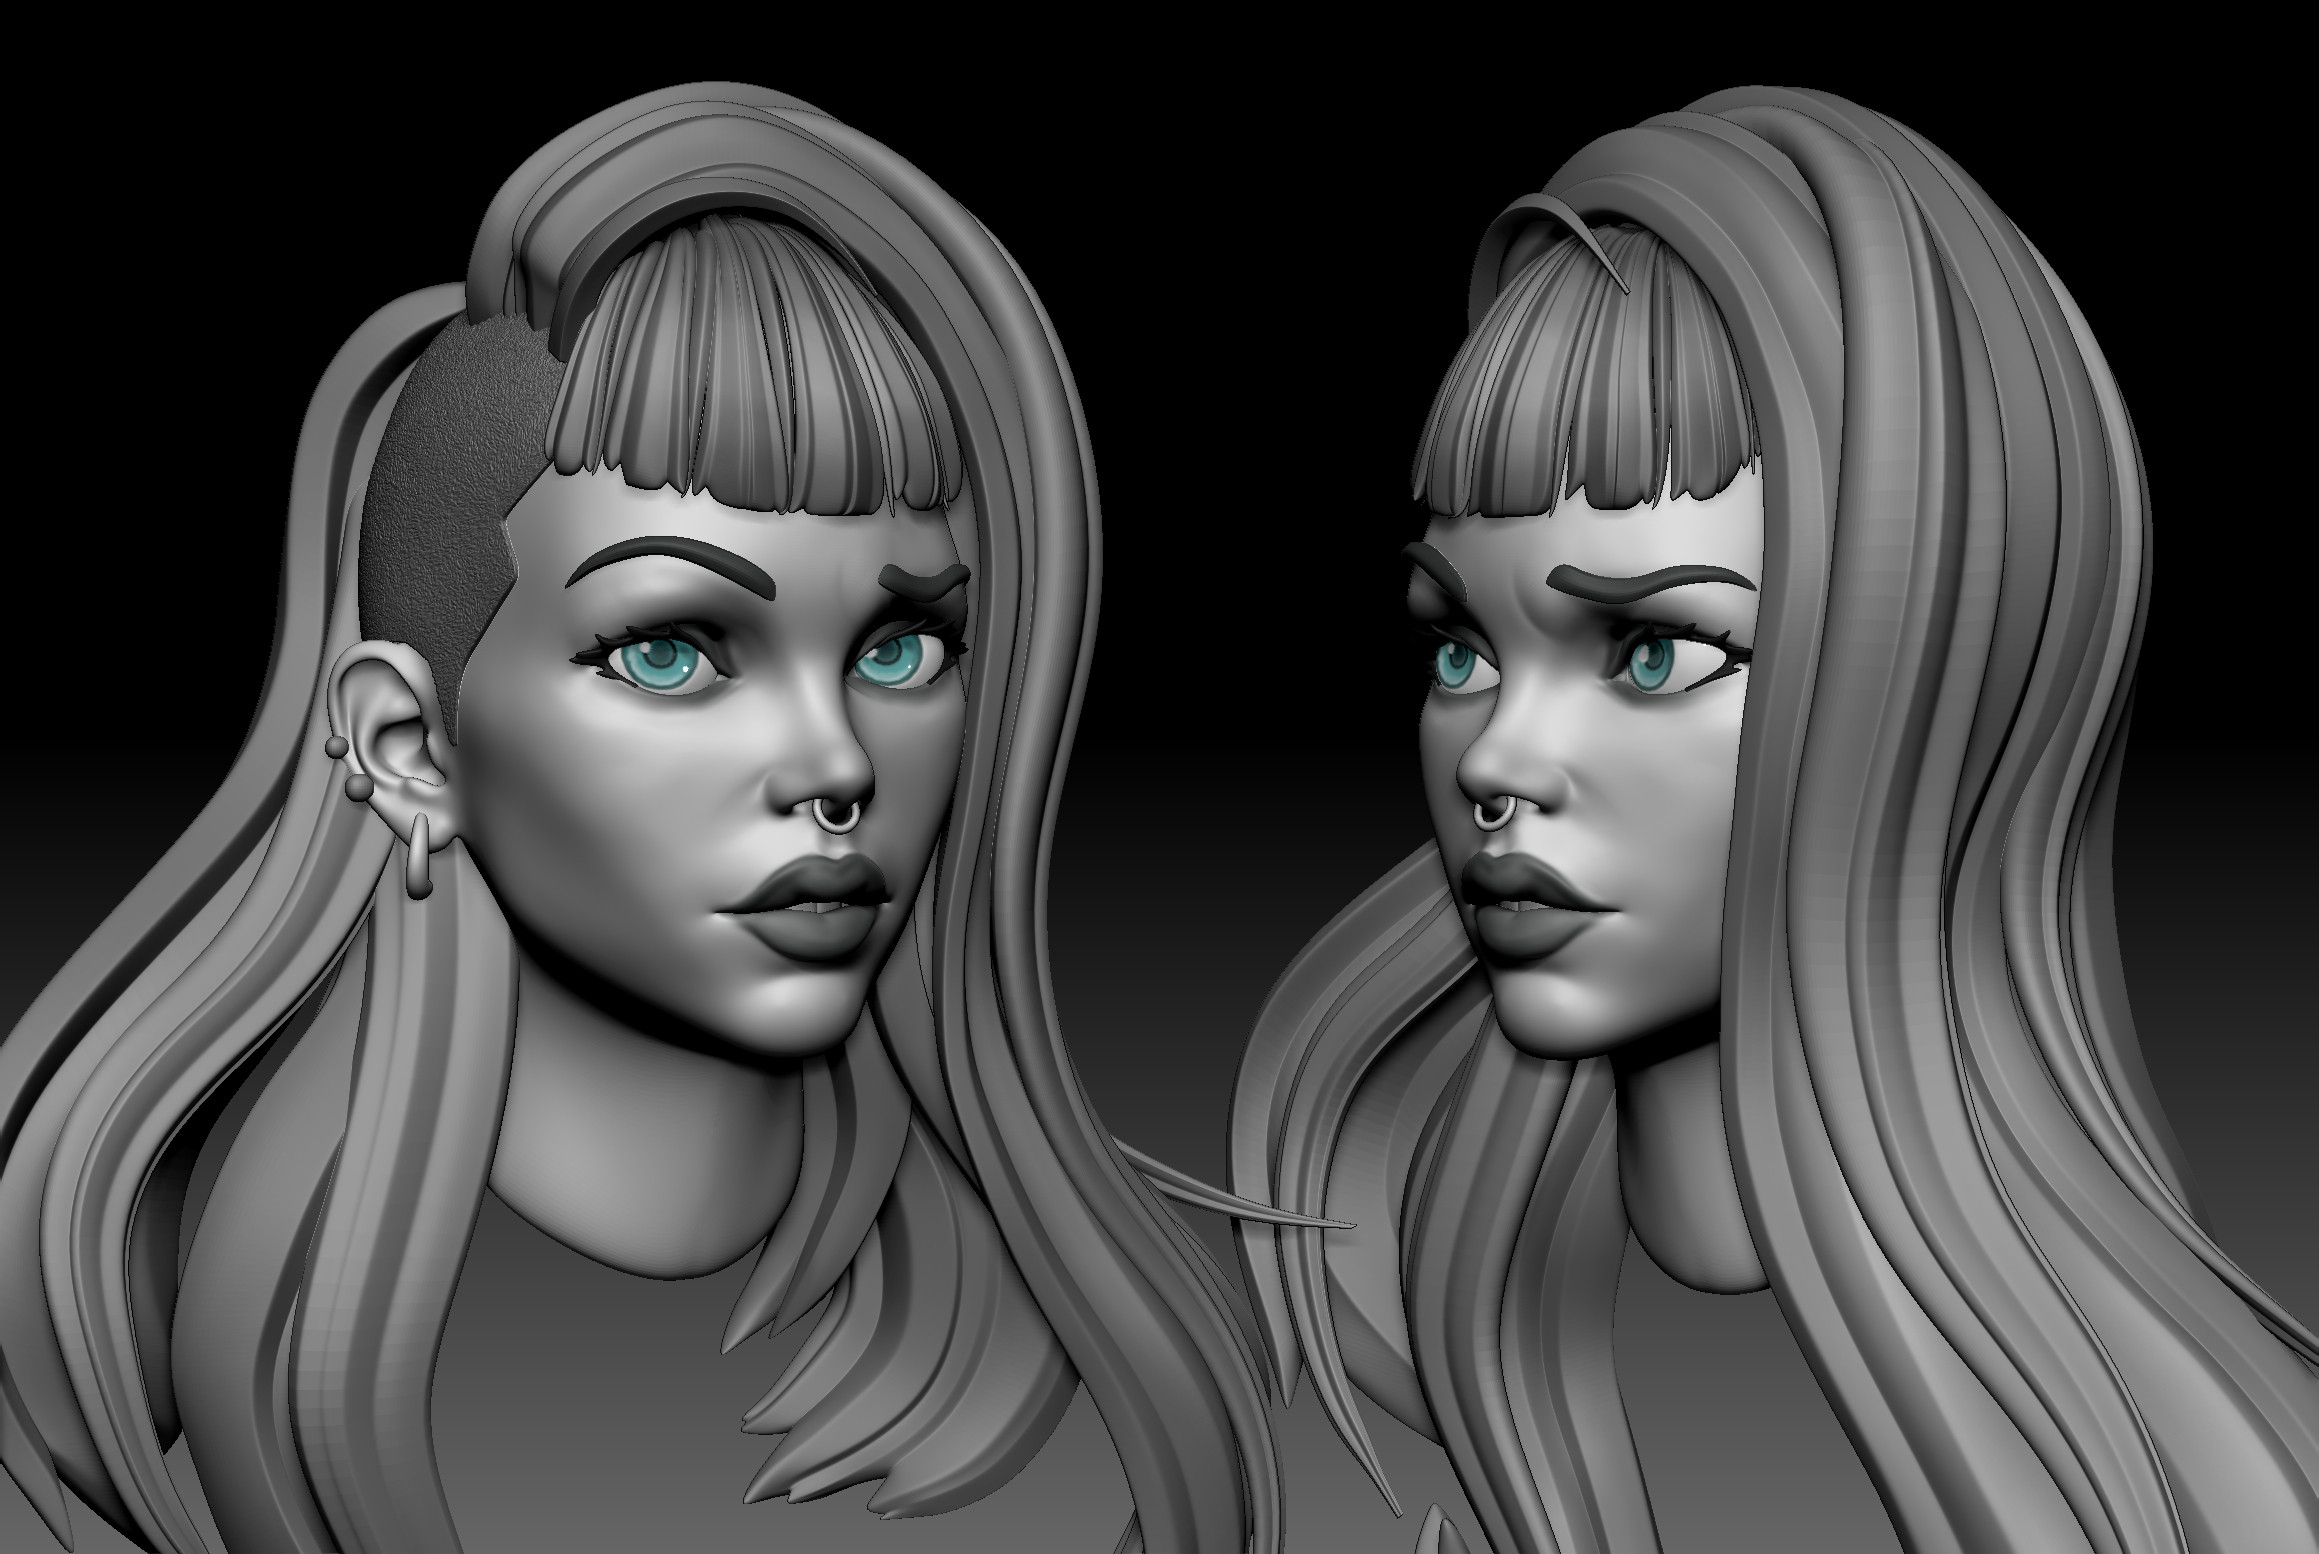 Couple of different angles of the sculpt